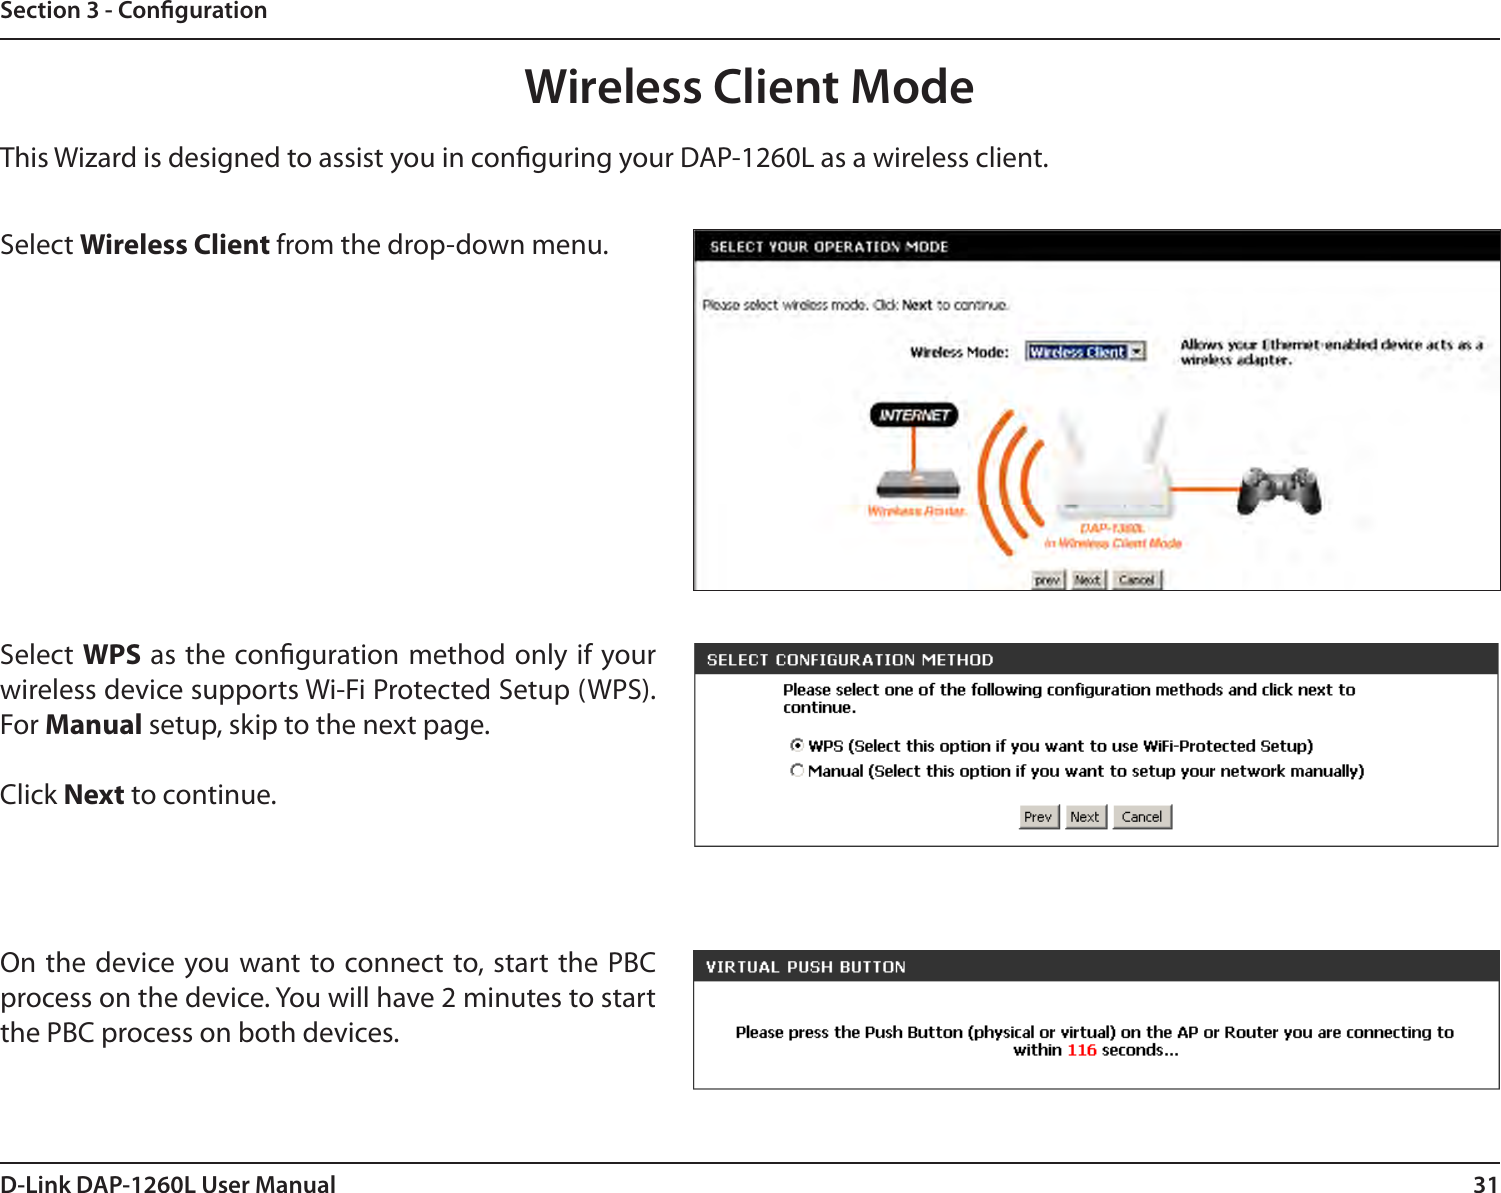 31D-Link DAP-1260L User ManualSection 3 - CongurationThis Wizard is designed to assist you in conguring your DAP-1260L as a wireless client.Wireless Client ModeSelect Wireless Client from the drop-down menu. Select WPS as the conguration method only if your wireless device supports Wi-Fi Protected Setup (WPS). For Manual setup, skip to the next page.Click Next to continue.On the device you want to connect to, start the PBC process on the device. You will have 2 minutes to start the PBC process on both devices.